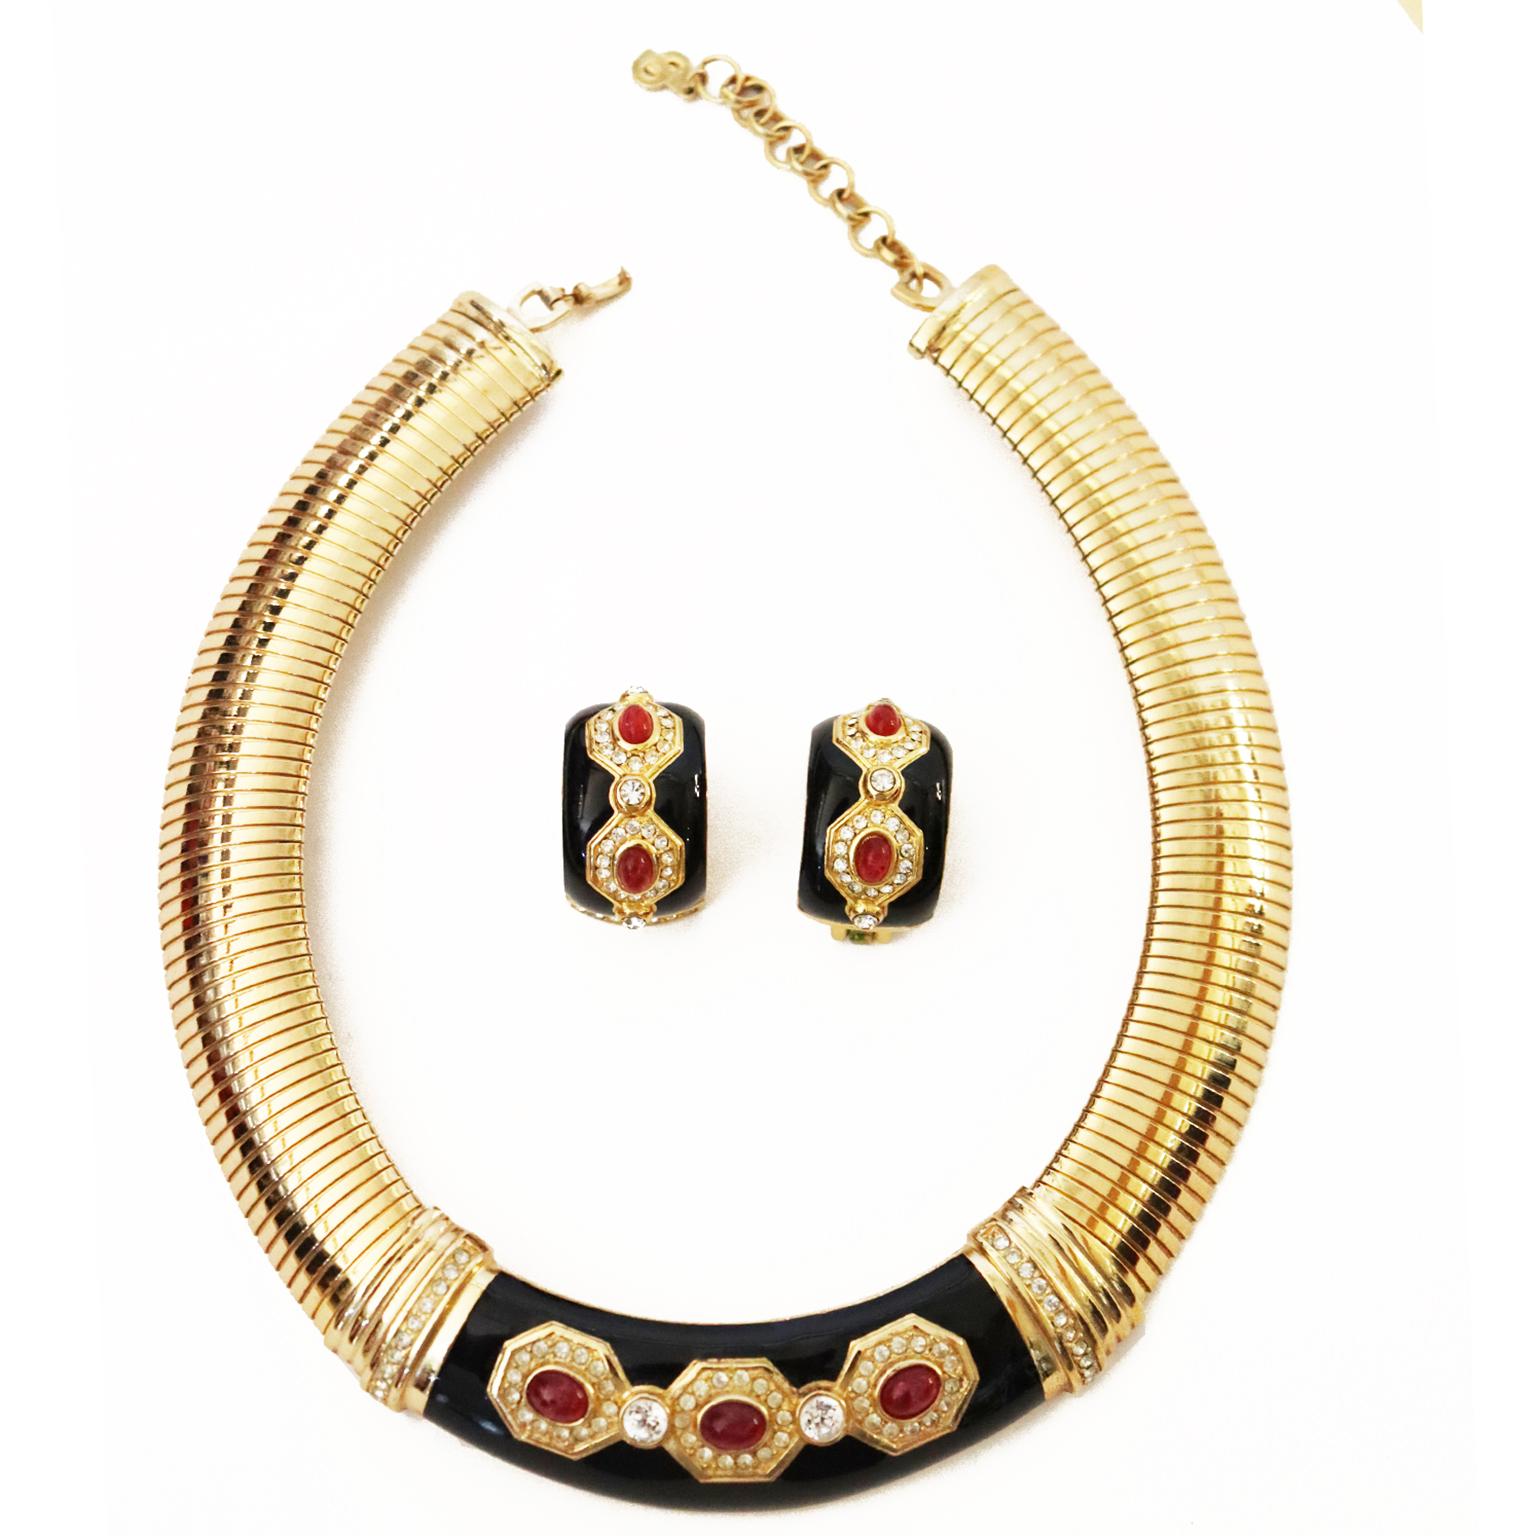 This gorgeous vintage Christian Dior jewelry set includes an omega gold plated collar necklace with black enamel, crystals and carnelian like stones and the matching clip earrings.The earrings are 1